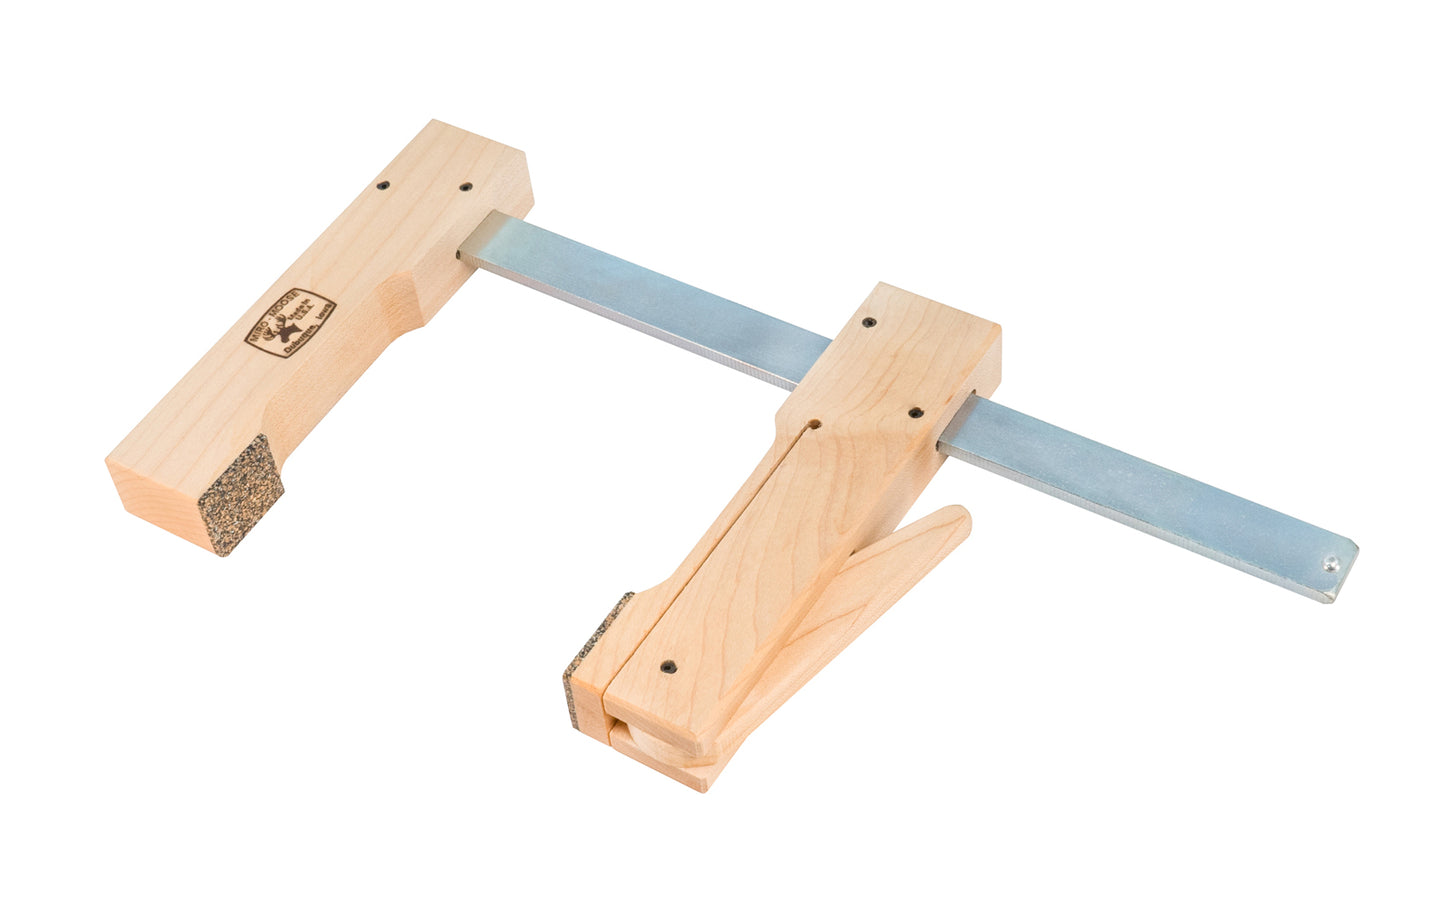 This "Miro-Moose" Maple cam clamp by Dubuque Clamp Works is a lightweight wooden cam clamp with a 8" opening capacity & 4-1/2" deep throat. The upper jaw slides into position, & the offset cam lever delicately locks the work piece in place giving strong pressure. The clamp has cork pads. Made in USA. Model 00015 ~ 099687000151